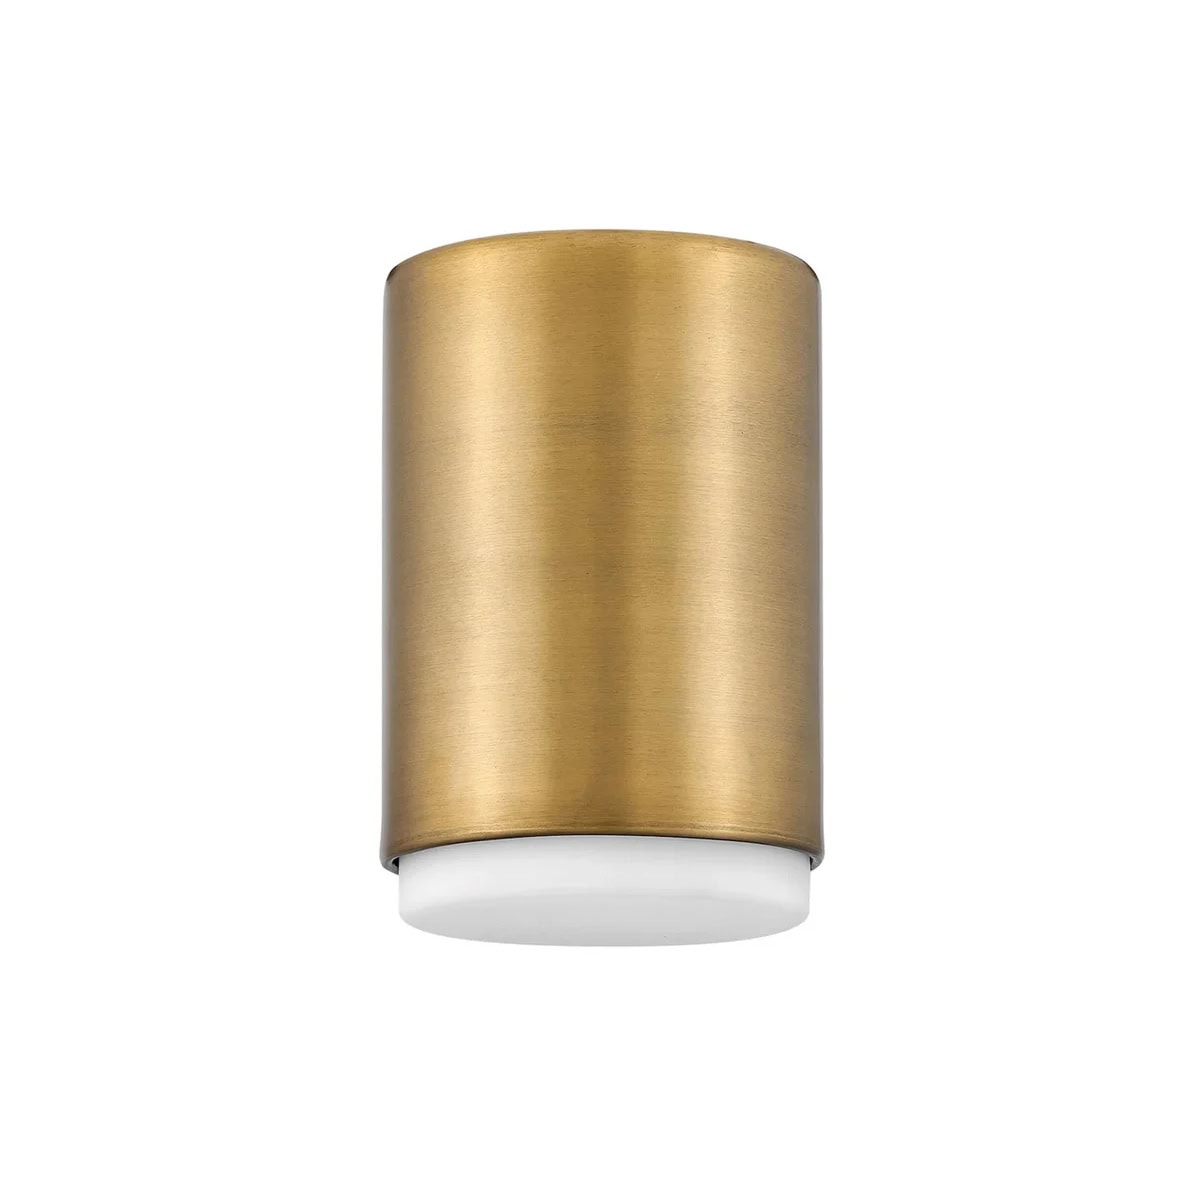 Product image of Cedric Ceiling Mount Surface Downlight Brass